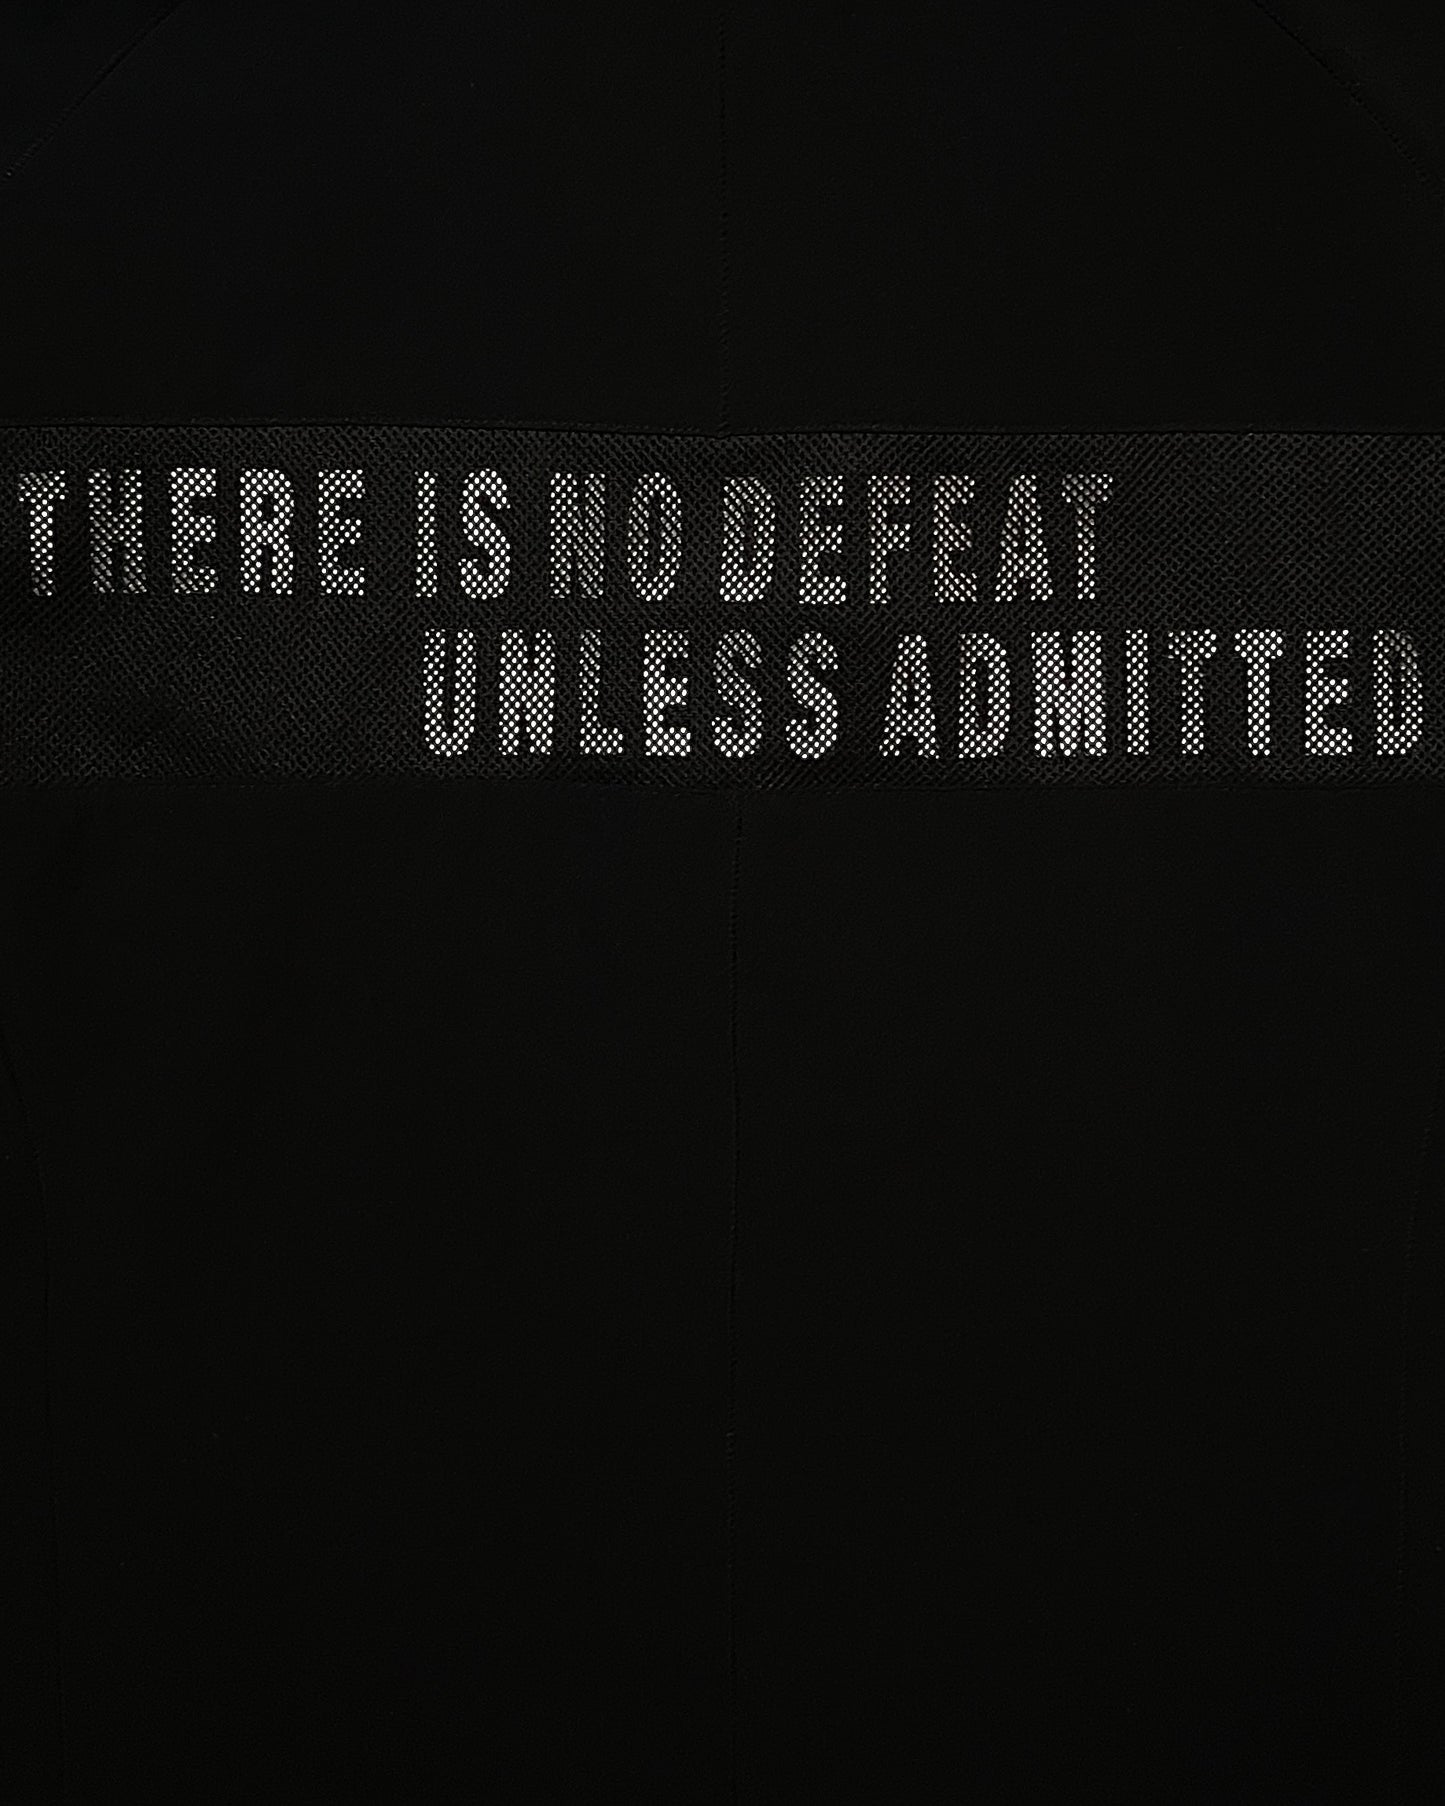 Shellac "There Is No Defeat" Mesh Panel Zip-Up